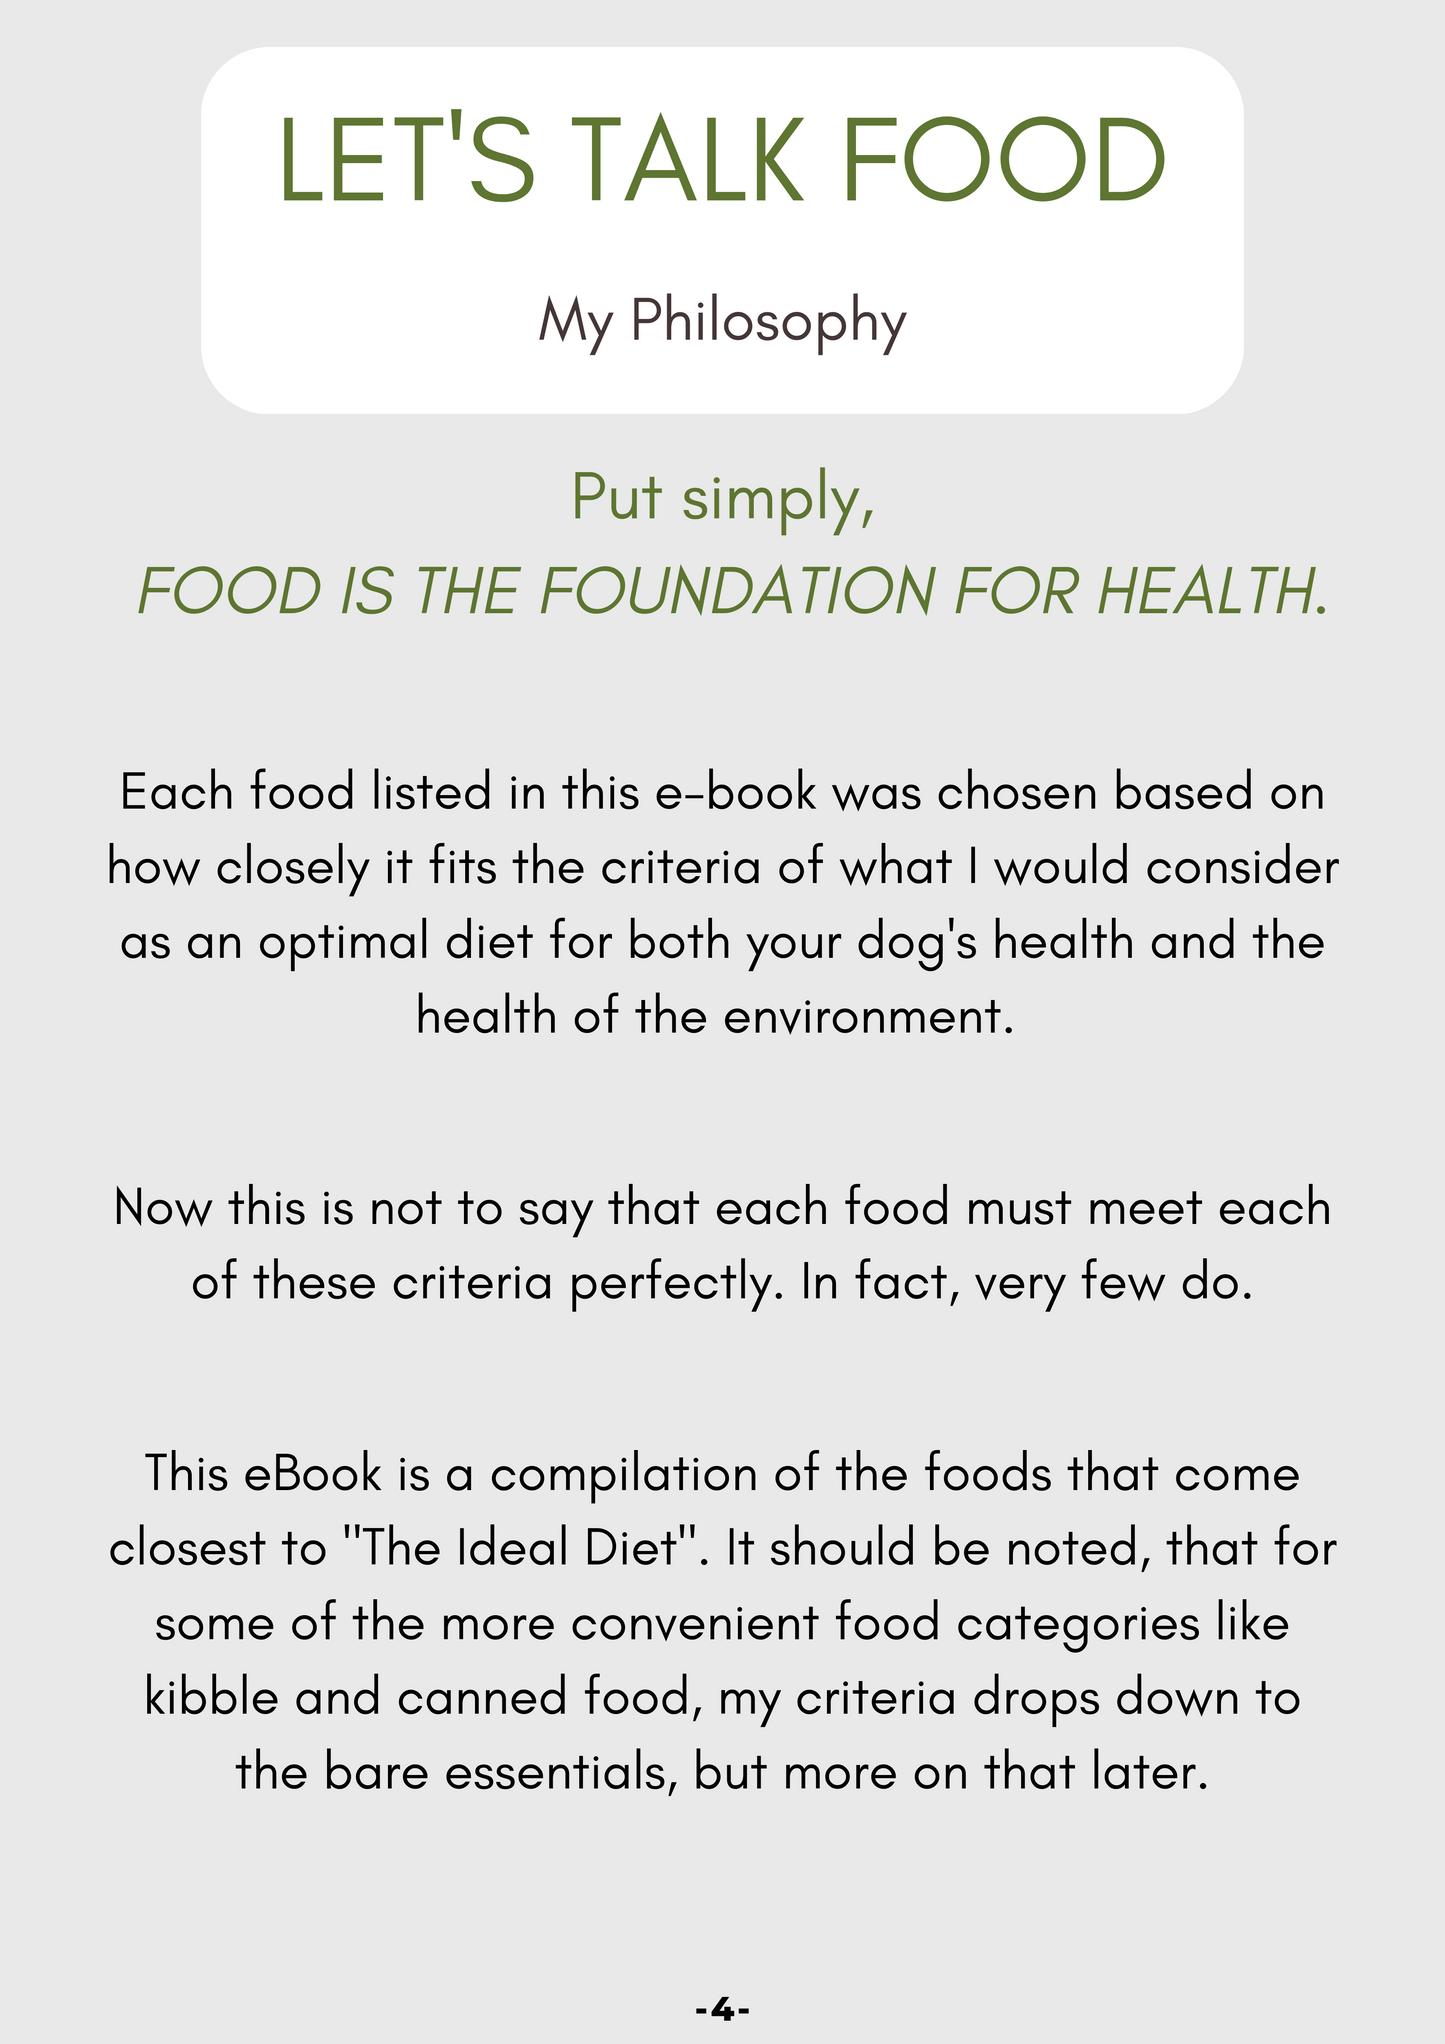 Best Foods for your Dog - Free eBook